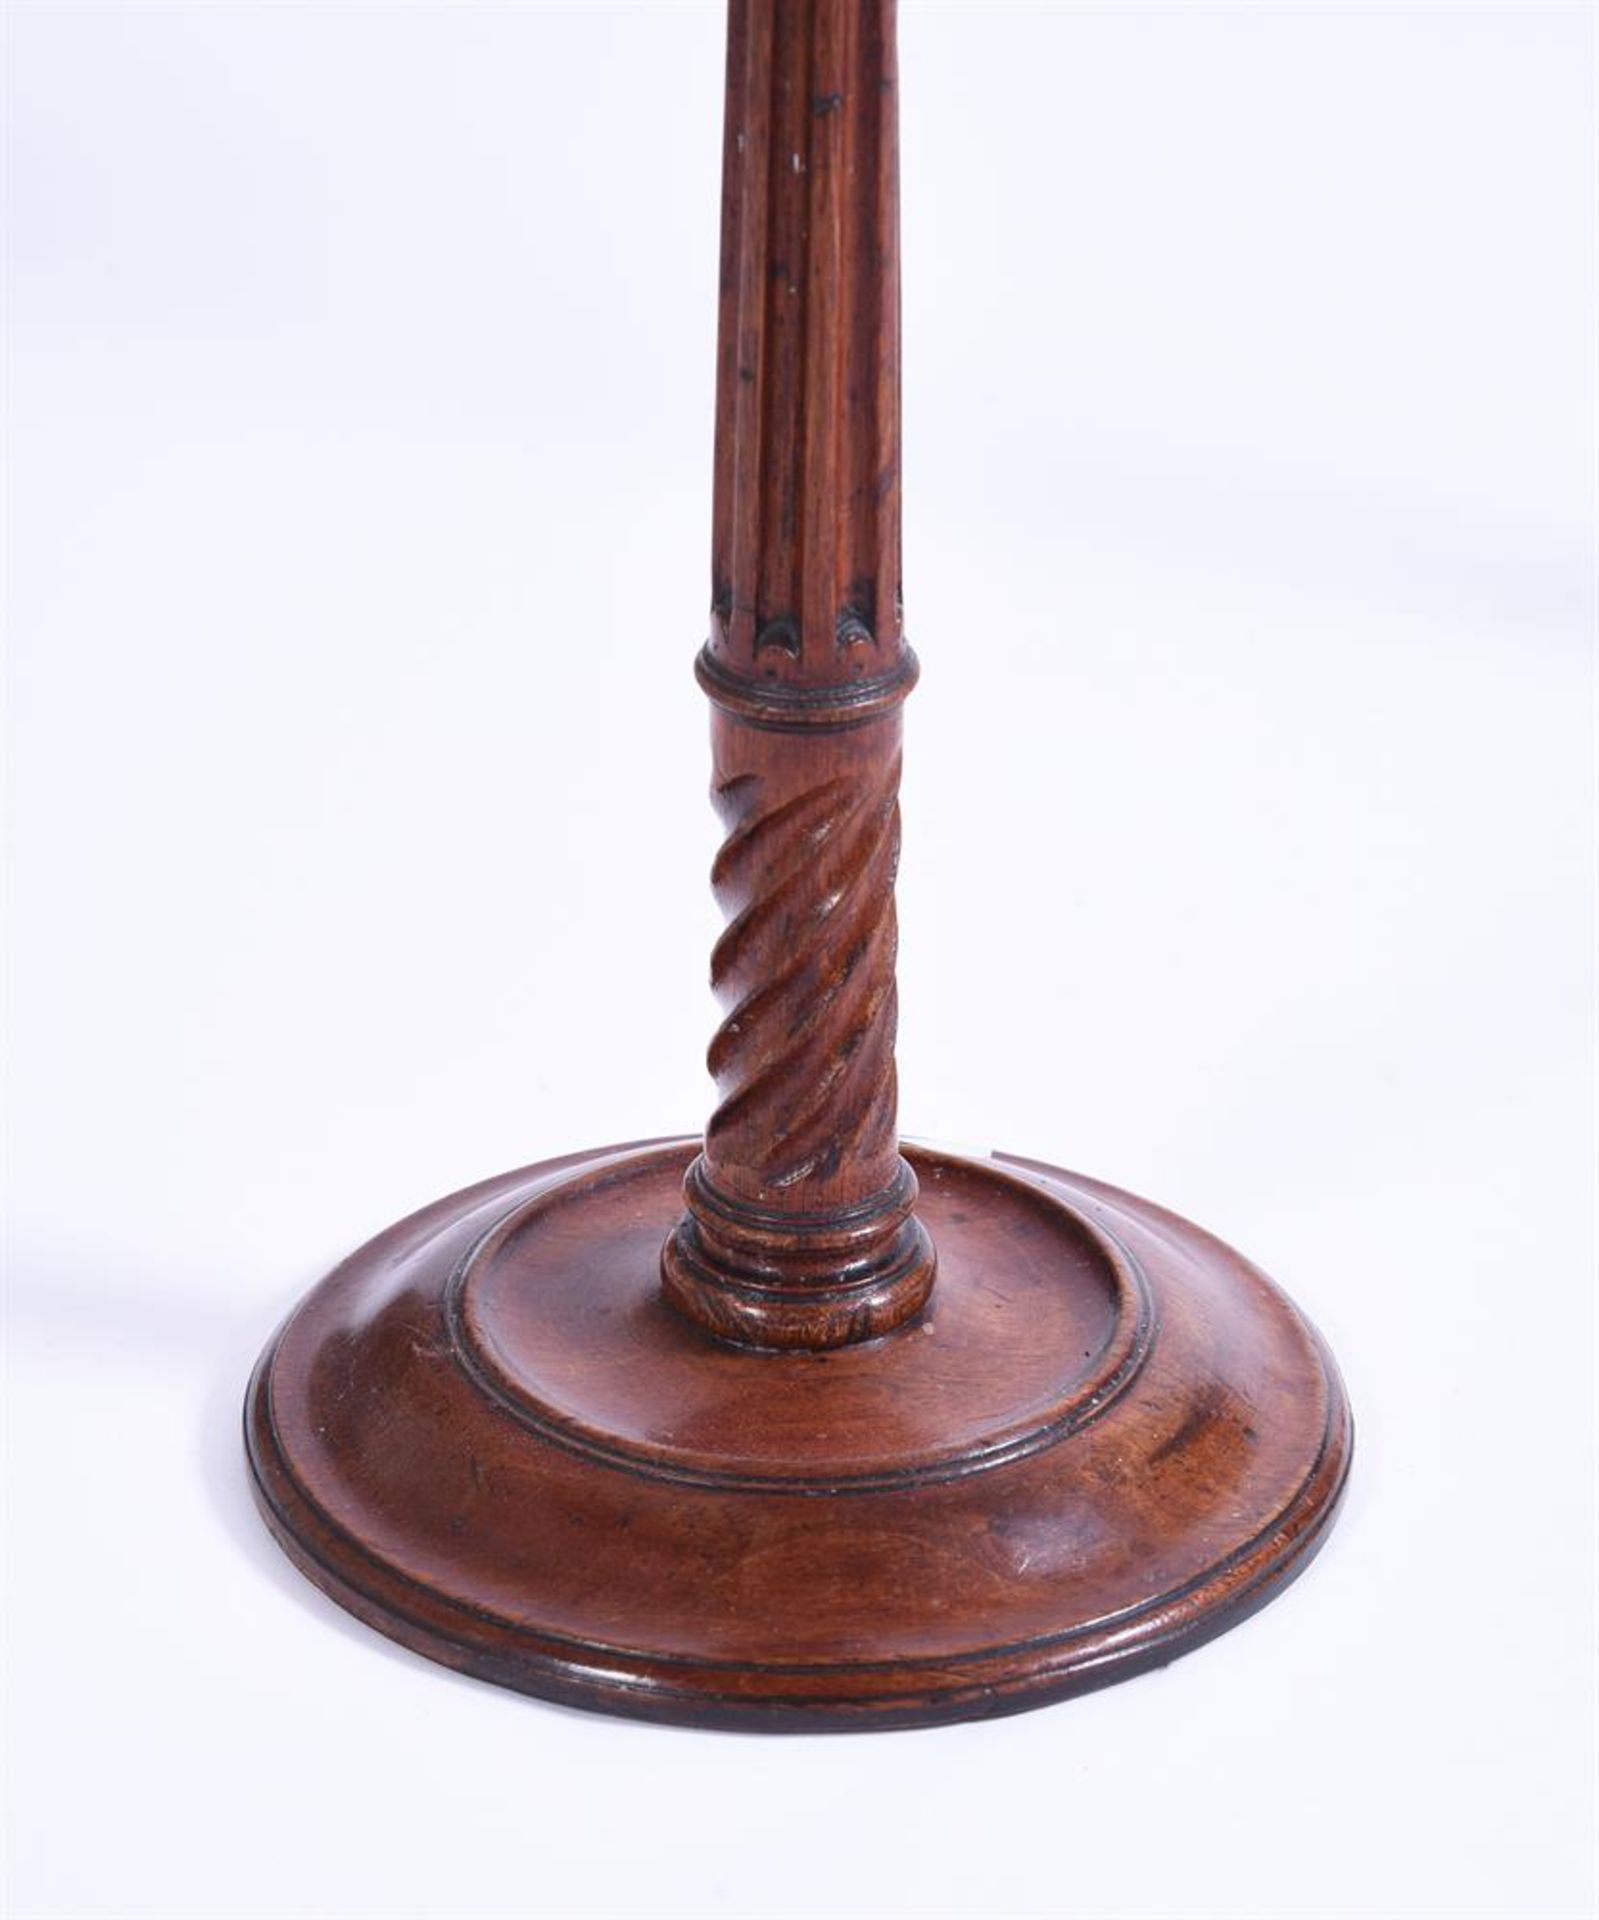 A PAIR OF GEORGE III MAHOGANY CANDLESTICKS, POSSIBLY SCOTTISH - Image 4 of 4